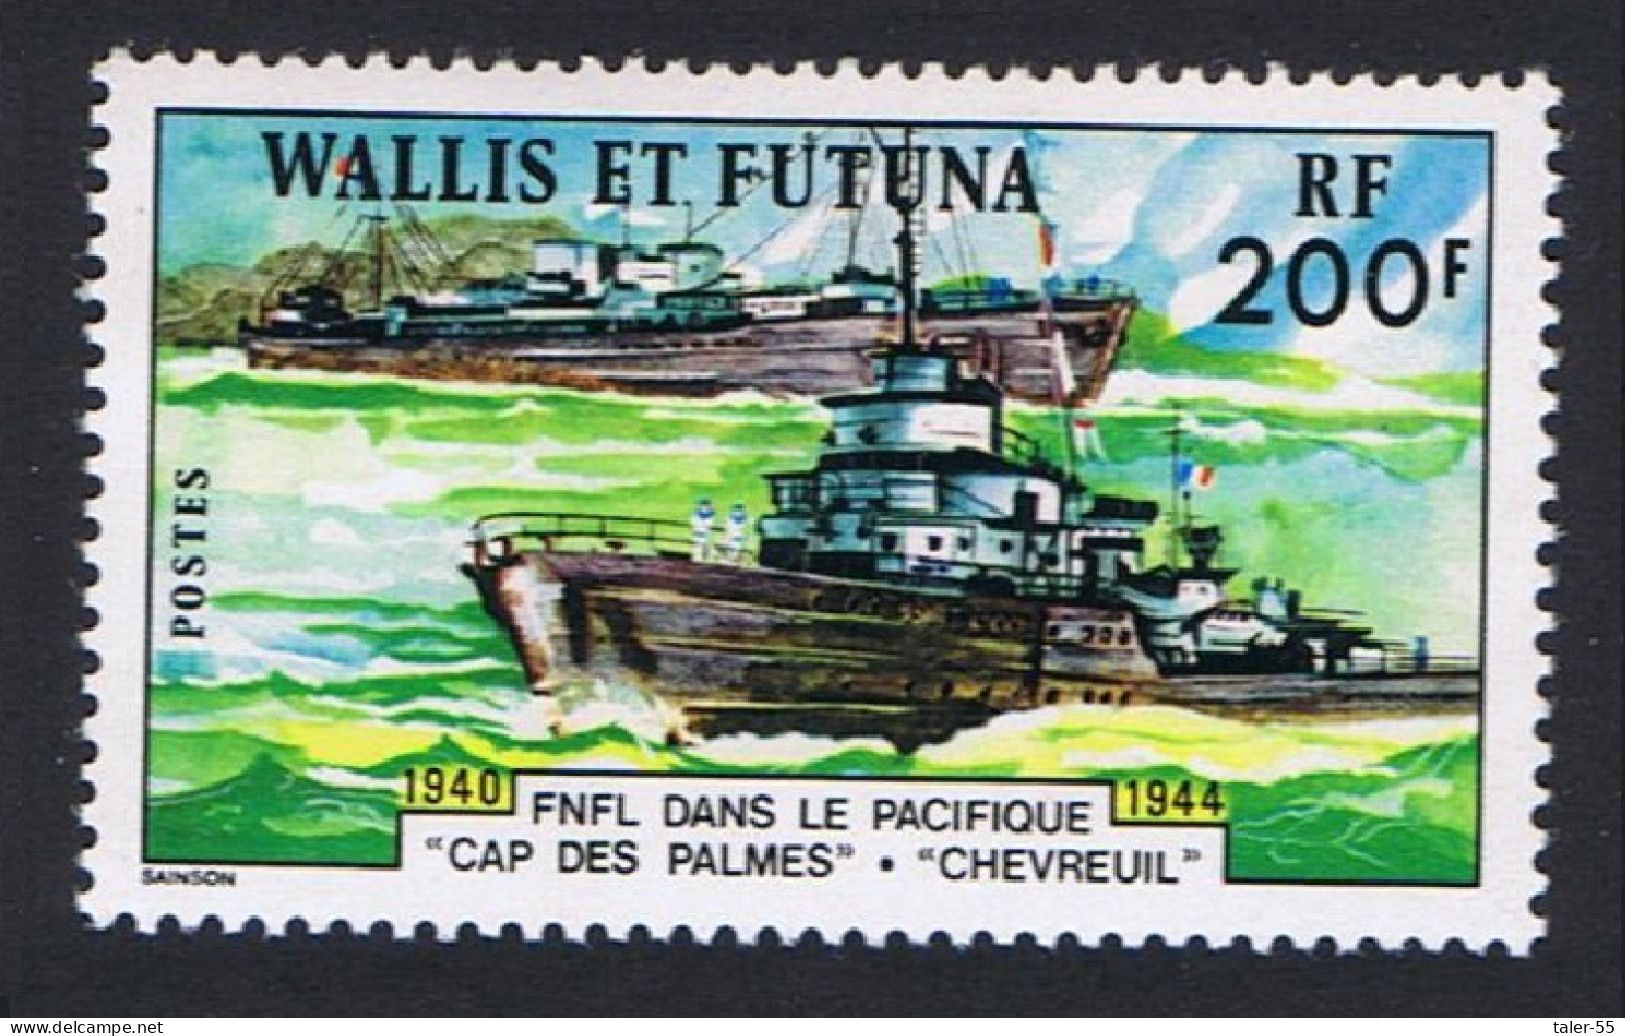 Wallis And Futuna Pacific Naval Force 200f 1978 MNH SG#288 Sc#208 - Unused Stamps